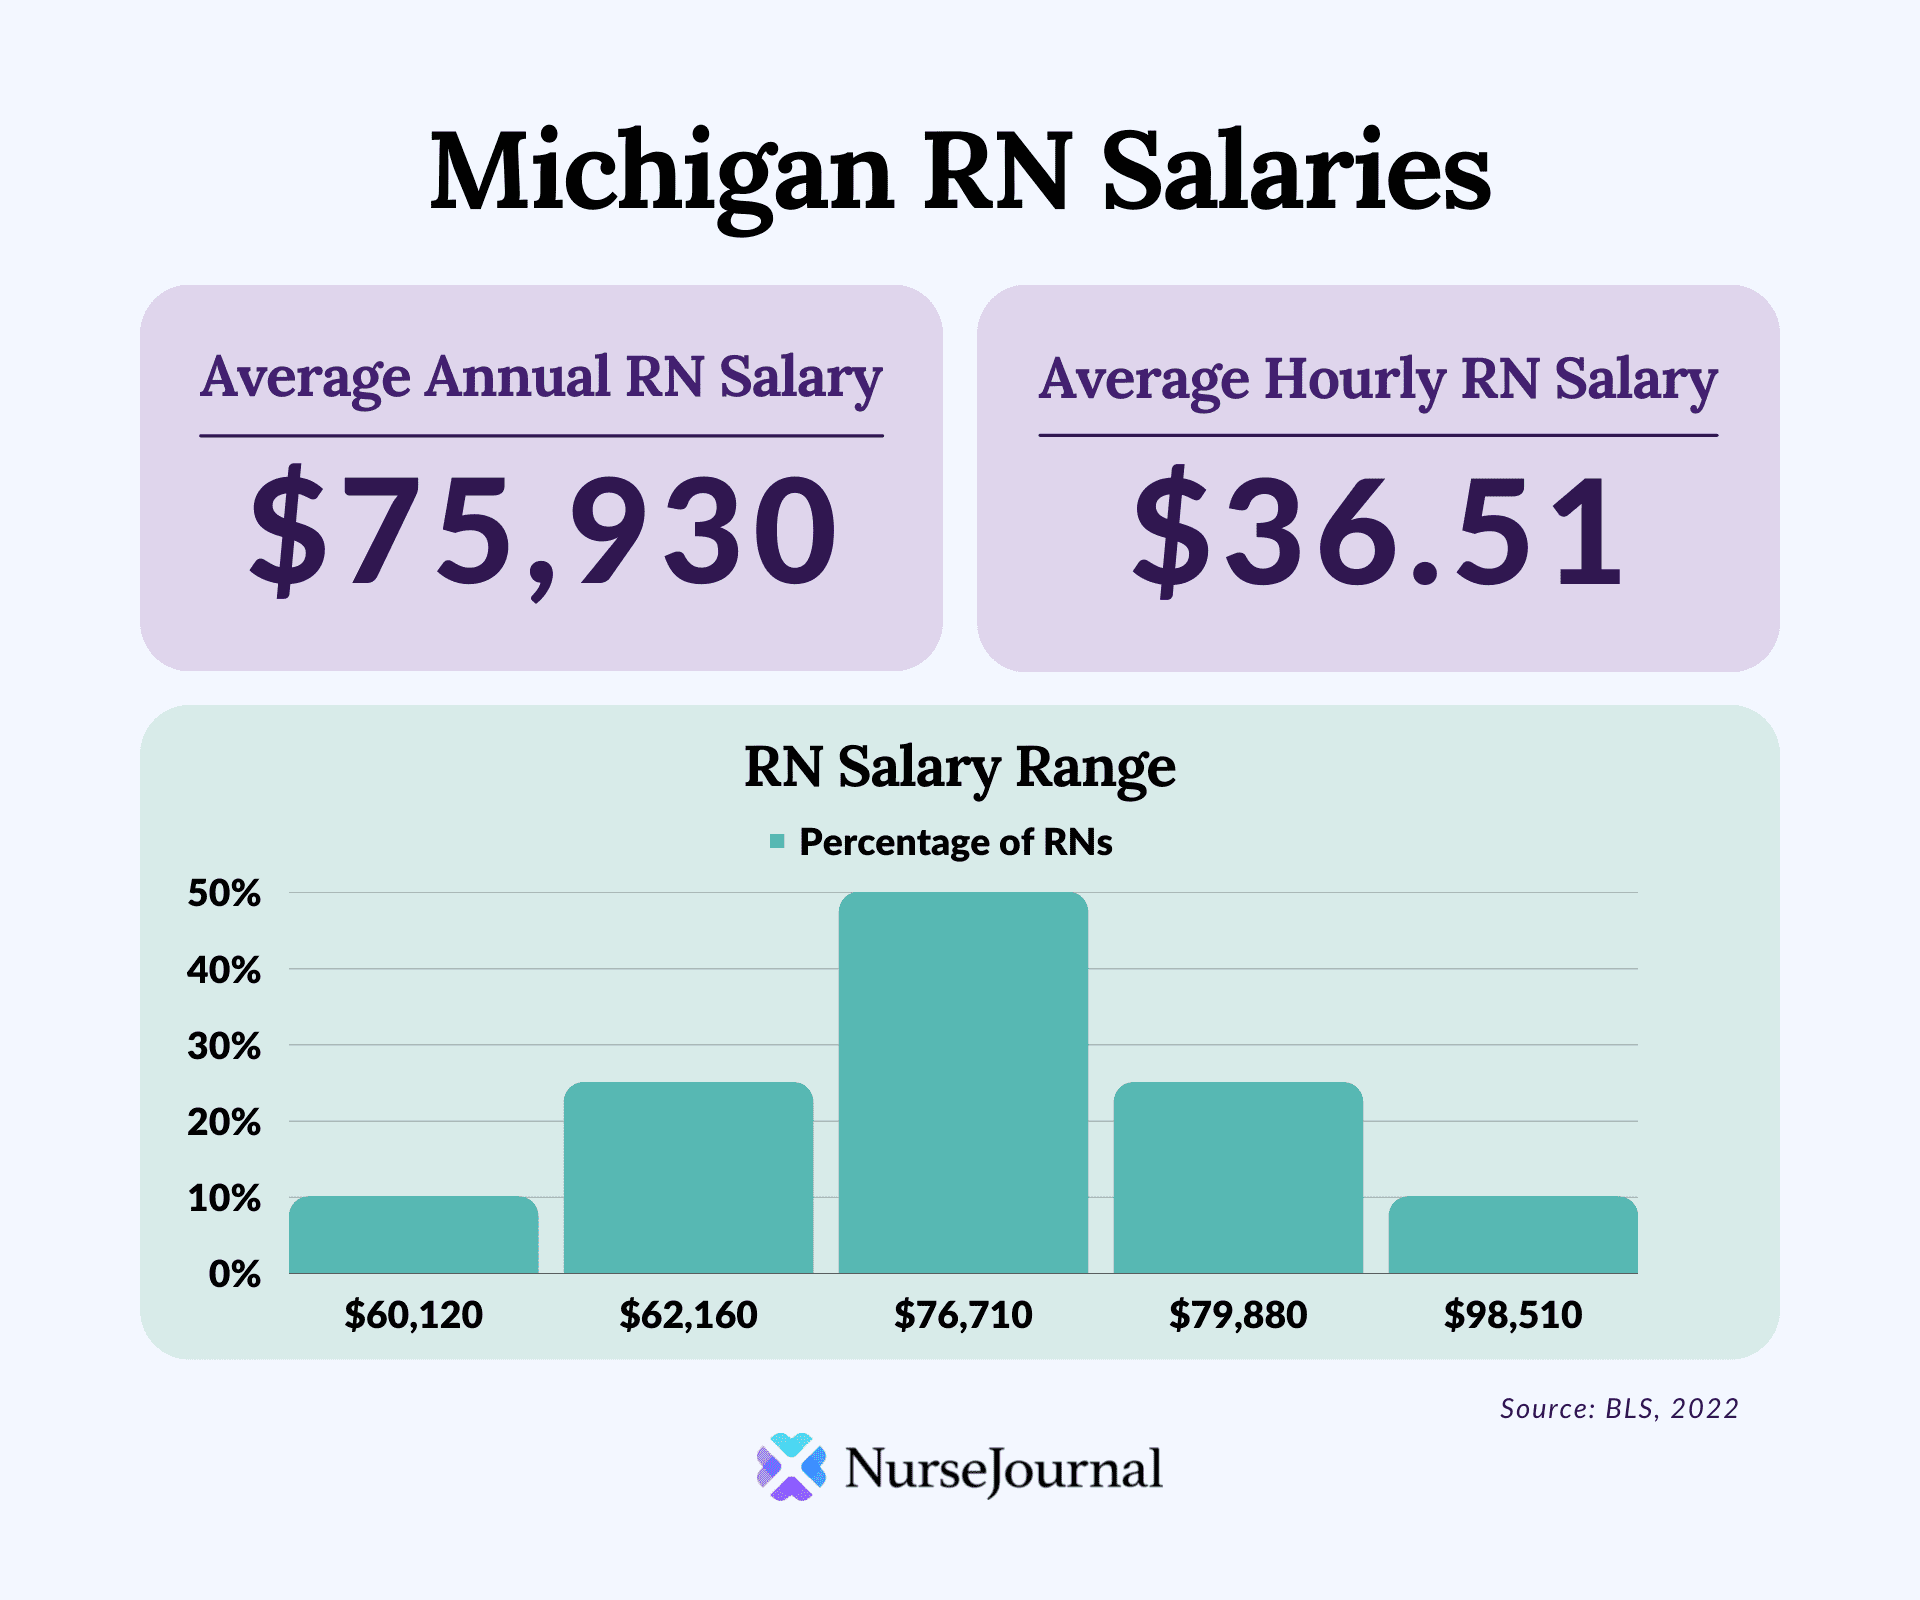 Infographic of registered nursing salary data in Michigan. The average annual RN salary is 75930. The average hourly RN salary is 36.51. Average RN salaries range from 60120 among the bottom 10th percentile of earners to 98510 among the top 90th percentile of earners.